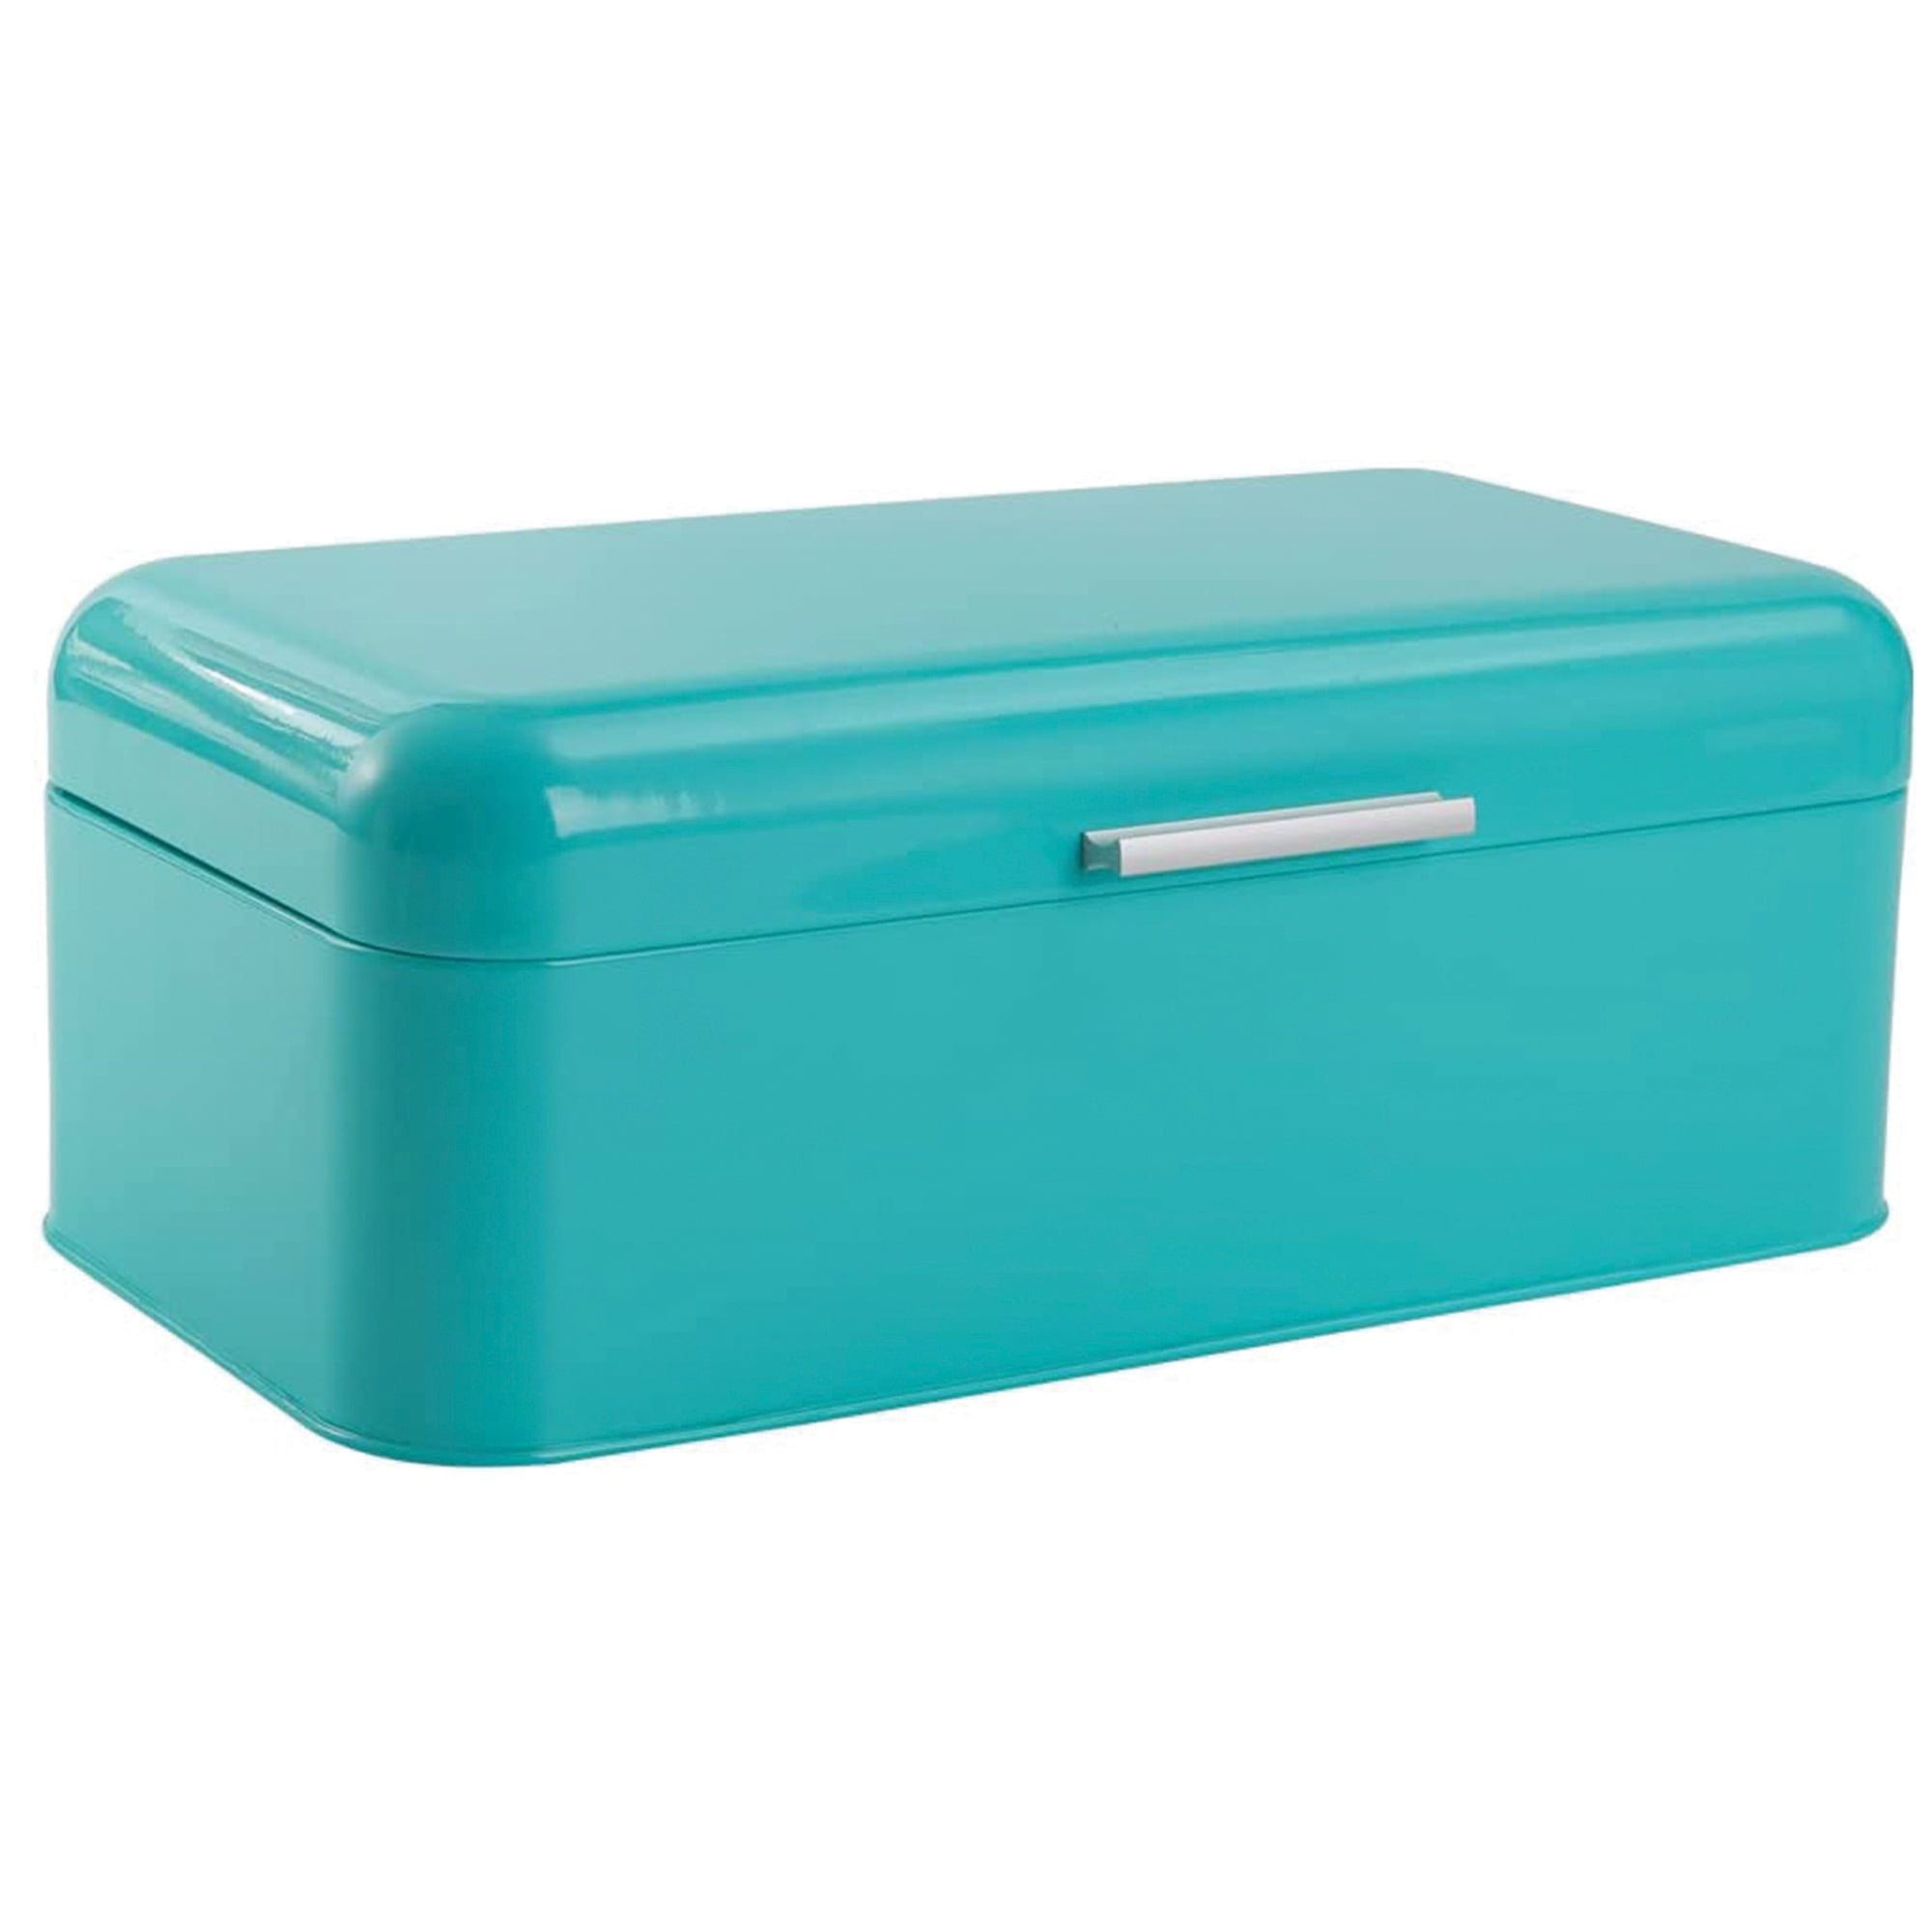 Brabantia Roll Top Bread Box, 3 Colors, Sustainable on Food52